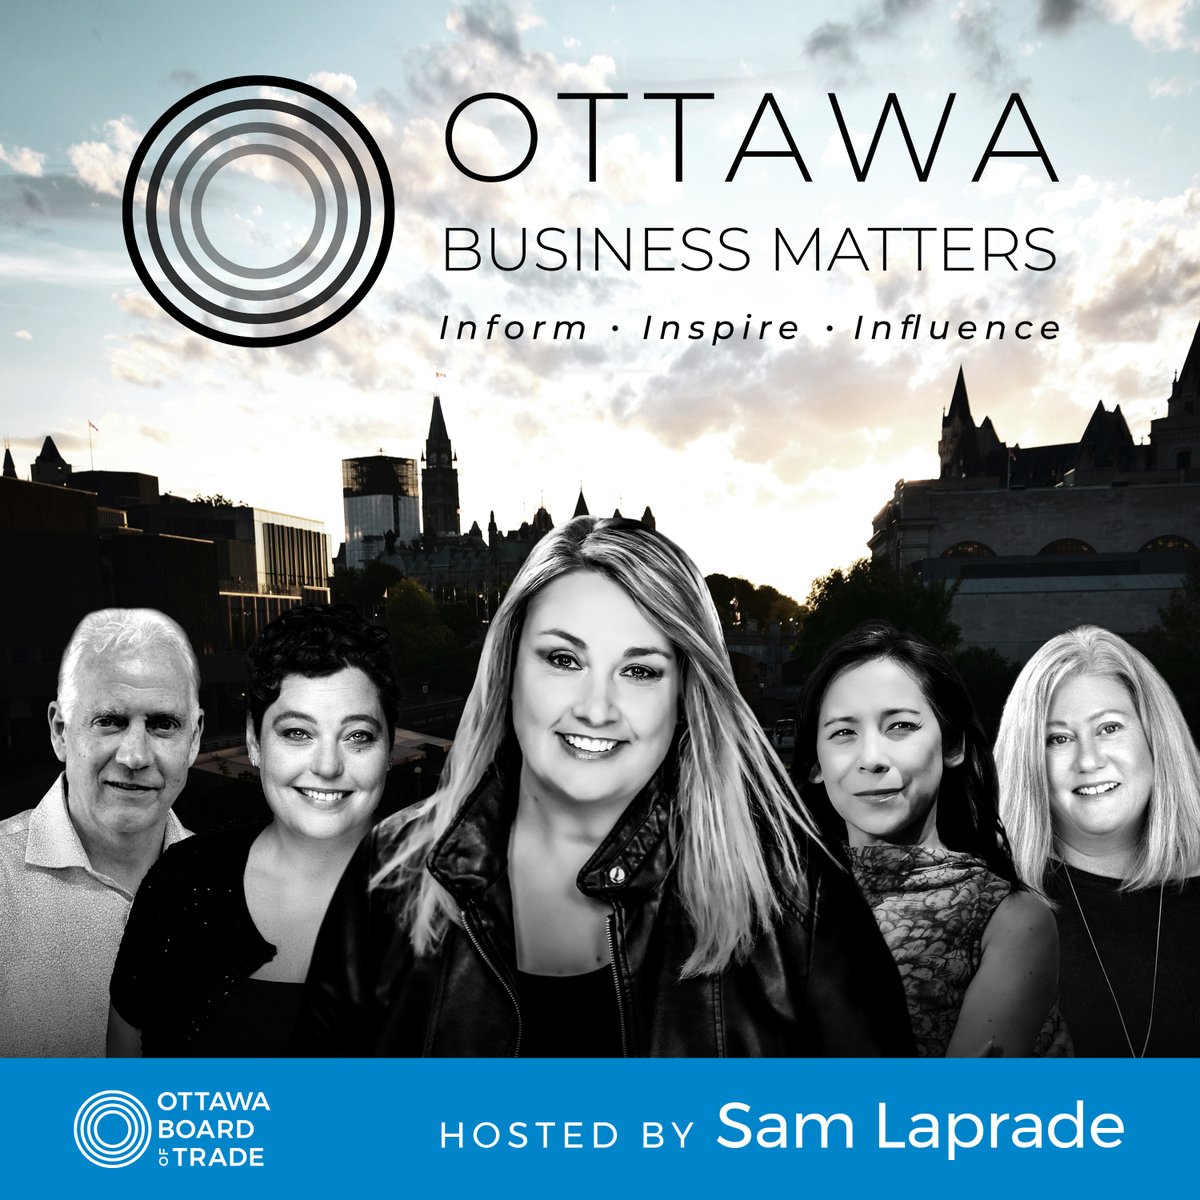 Have you watched episode 10 of #OttawaBusinessMatters? From tulips blooming at the @CdnTulipfest this May to innovative local businesses, tune in as we explore the #Ottawa story. Watch here: bit.ly/4aYu9I6 Or where you get your podcasts: bit.ly/48uxigX